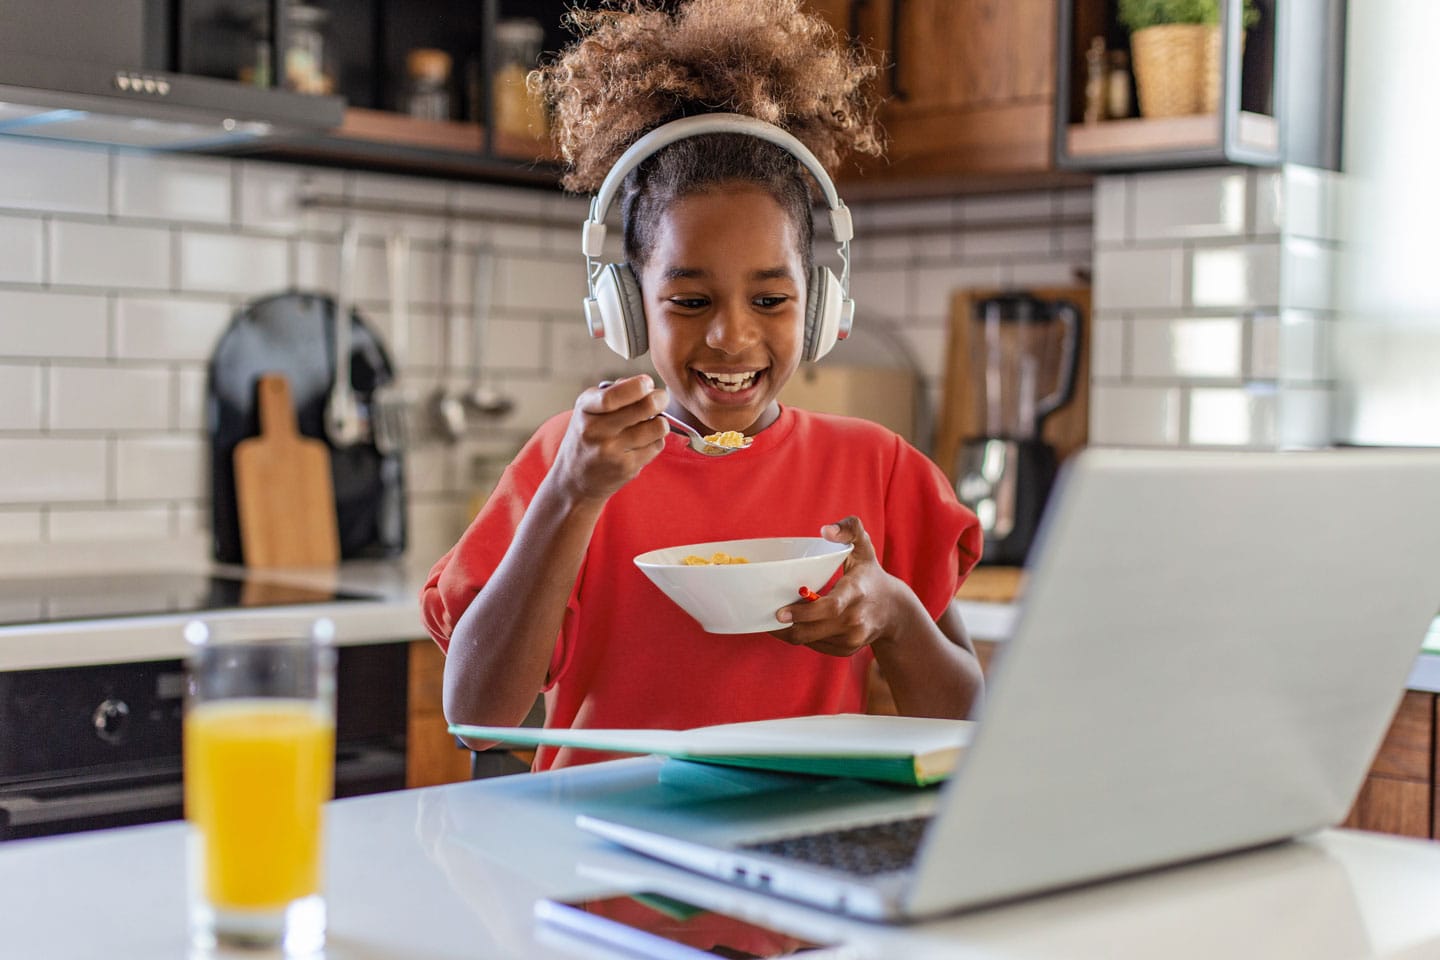 A girl eating cereal while using a laptop